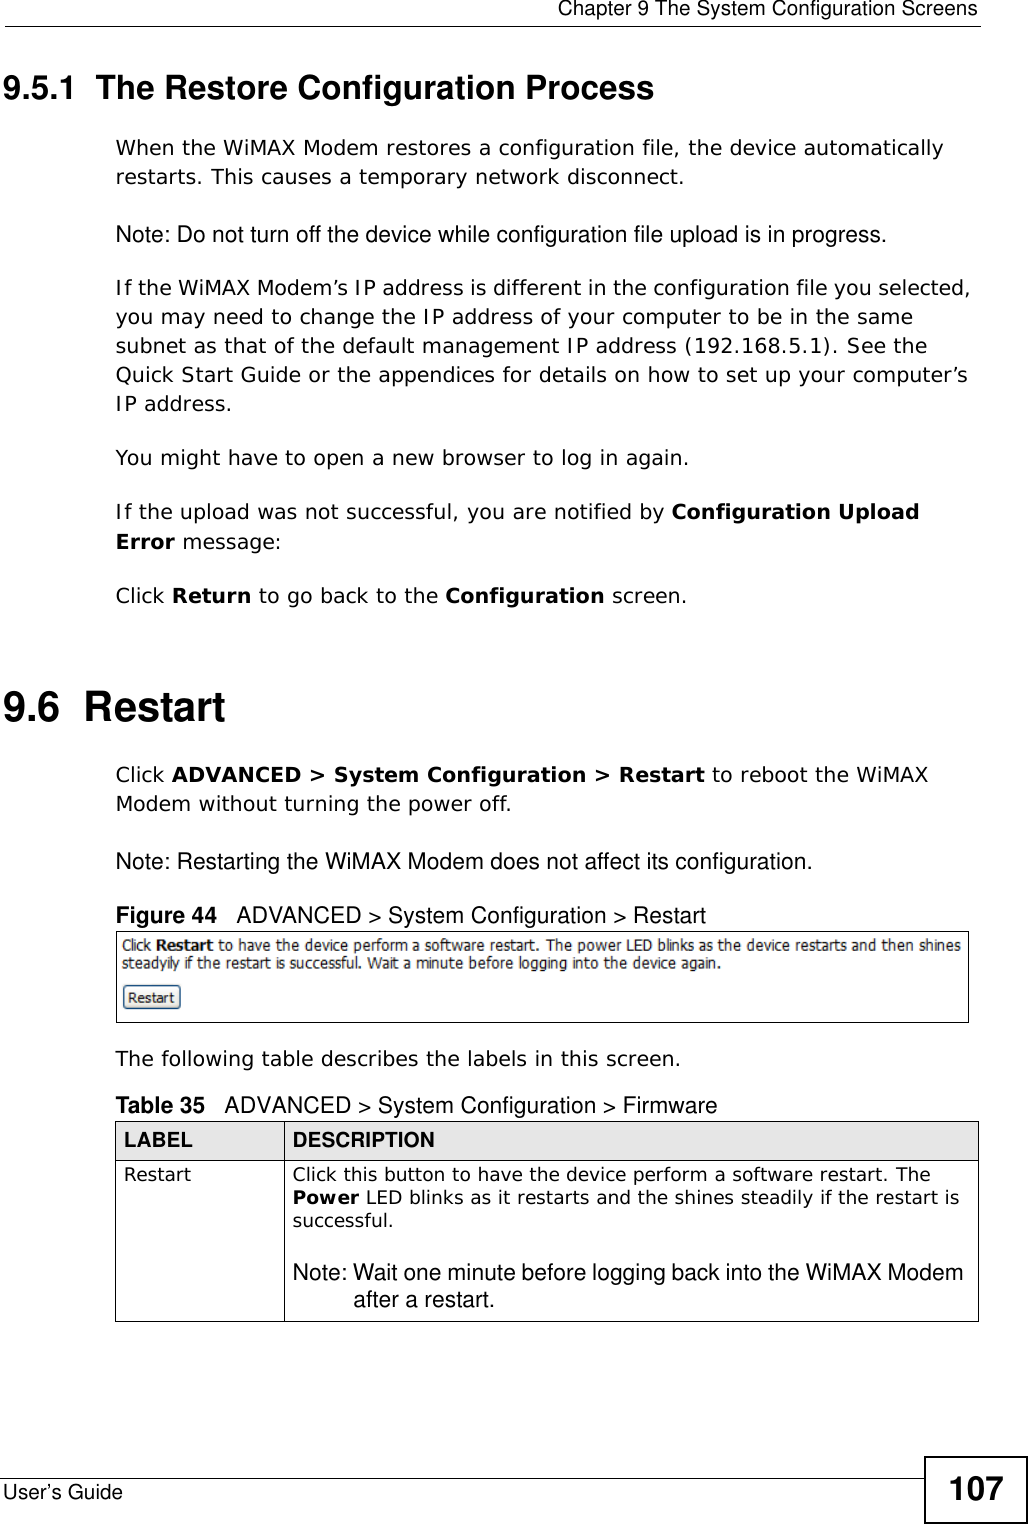  Chapter 9 The System Configuration ScreensUser’s Guide 1079.5.1  The Restore Configuration ProcessWhen the WiMAX Modem restores a configuration file, the device automatically restarts. This causes a temporary network disconnect. Note: Do not turn off the device while configuration file upload is in progress.If the WiMAX Modem’s IP address is different in the configuration file you selected, you may need to change the IP address of your computer to be in the same subnet as that of the default management IP address (192.168.5.1). See the Quick Start Guide or the appendices for details on how to set up your computer’s IP address.You might have to open a new browser to log in again.If the upload was not successful, you are notified by Configuration Upload Error message:Click Return to go back to the Configuration screen.9.6  RestartClick ADVANCED &gt; System Configuration &gt; Restart to reboot the WiMAX Modem without turning the power off.Note: Restarting the WiMAX Modem does not affect its configuration.Figure 44   ADVANCED &gt; System Configuration &gt; RestartThe following table describes the labels in this screen.    Table 35   ADVANCED &gt; System Configuration &gt; FirmwareLABEL DESCRIPTIONRestart  Click this button to have the device perform a software restart. The Power LED blinks as it restarts and the shines steadily if the restart is successful.Note: Wait one minute before logging back into the WiMAX Modem after a restart.